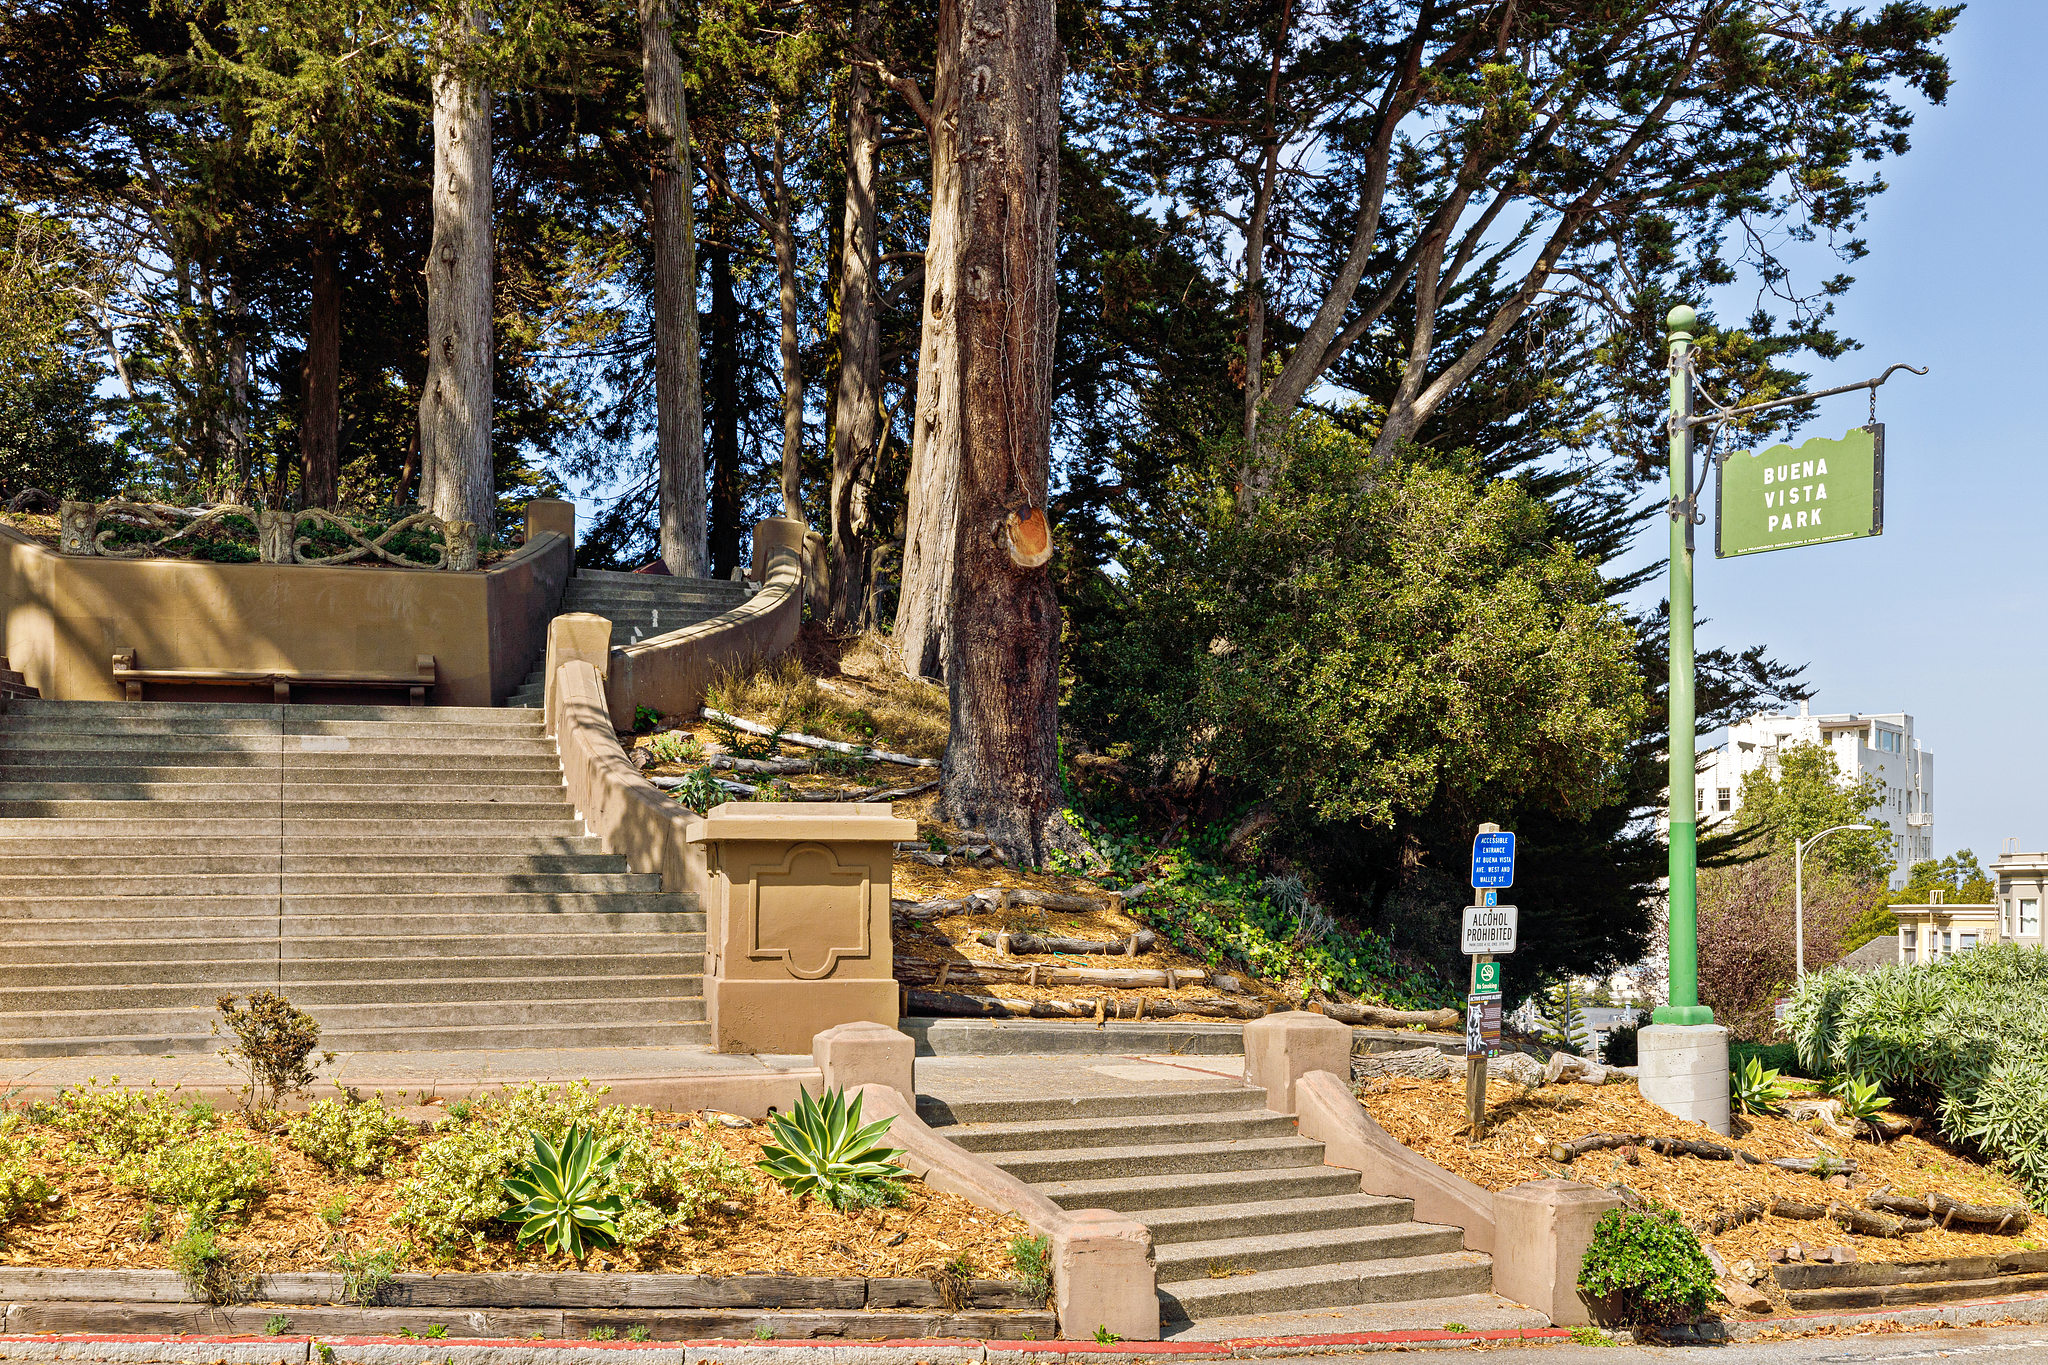 Stone steps and trees are featured next to a sign for Buena Vista Park